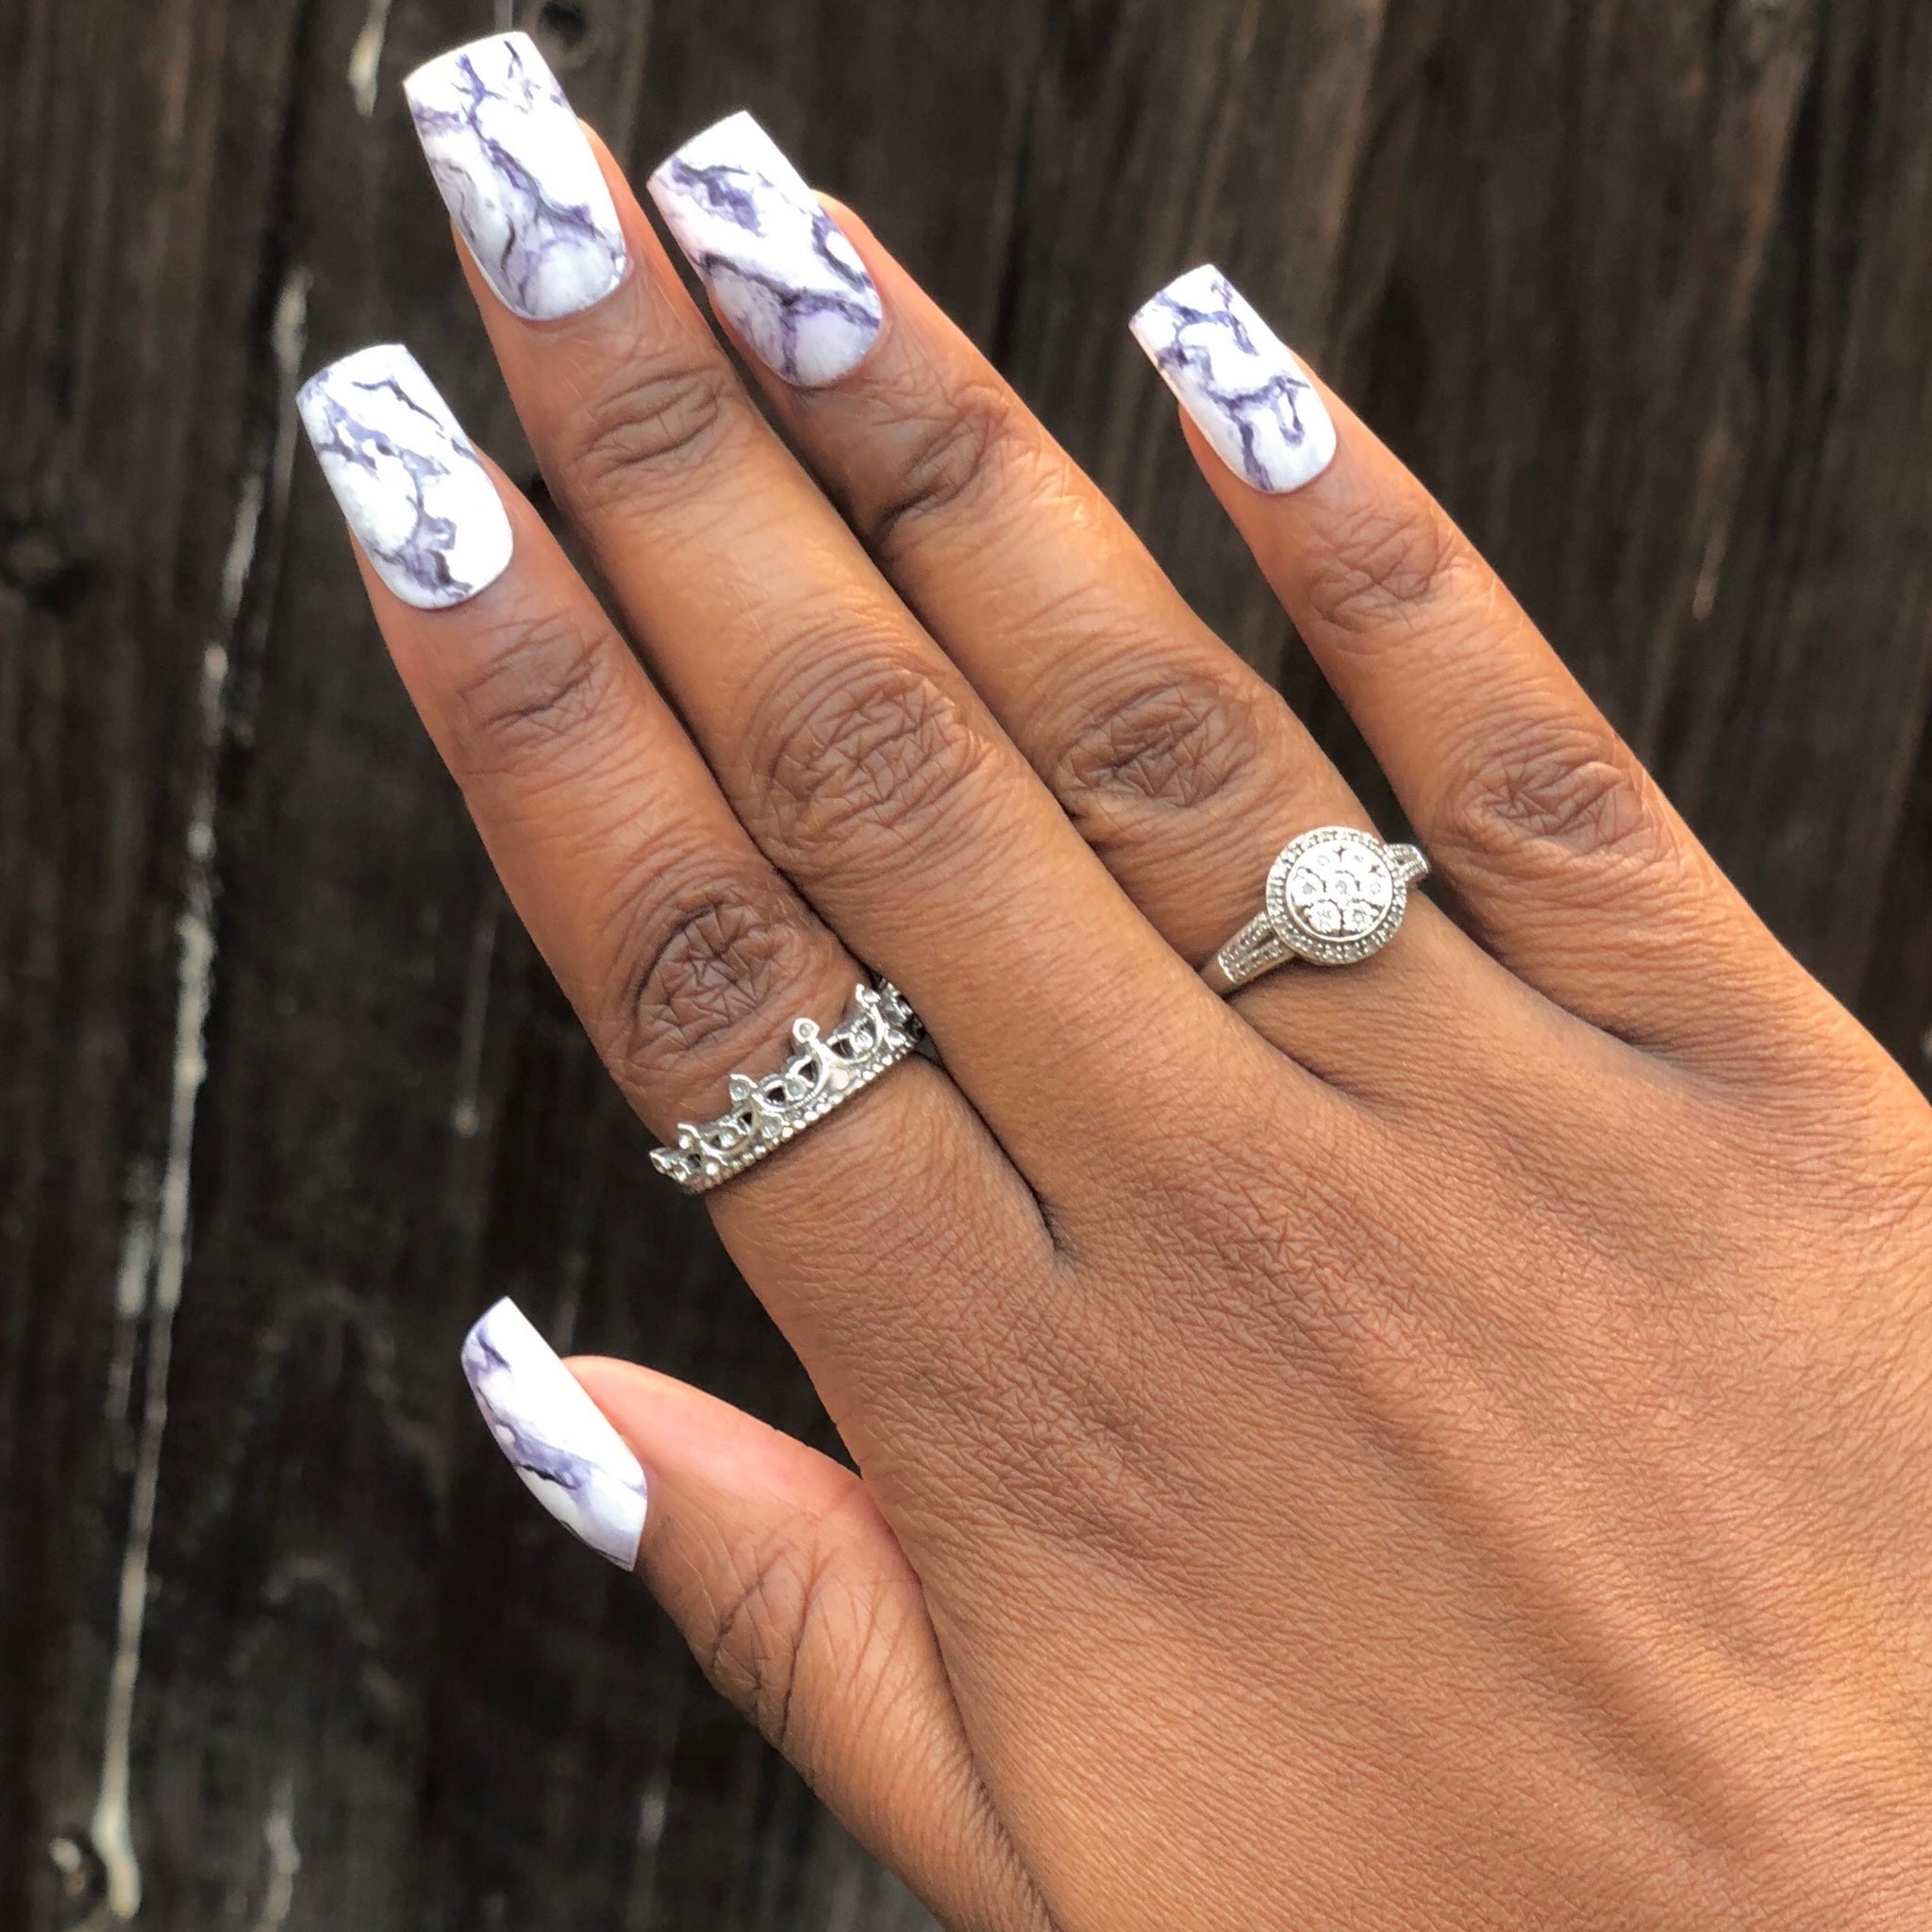 Manicure hand wearing marble press on nails.